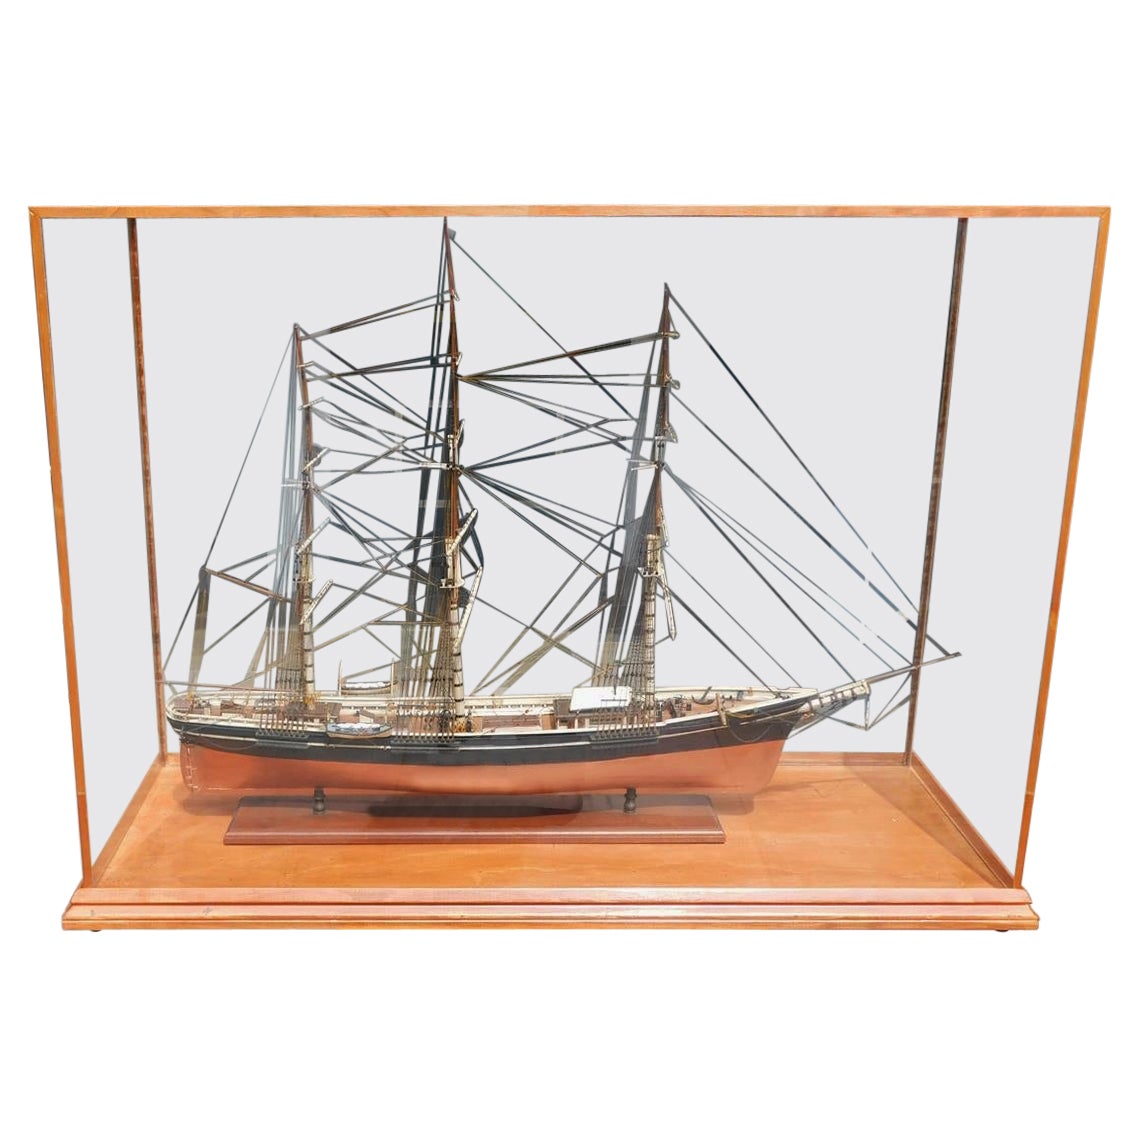 American Three Masted Clipper Ship Model Sovereign of the Seas Under Glass, 20th